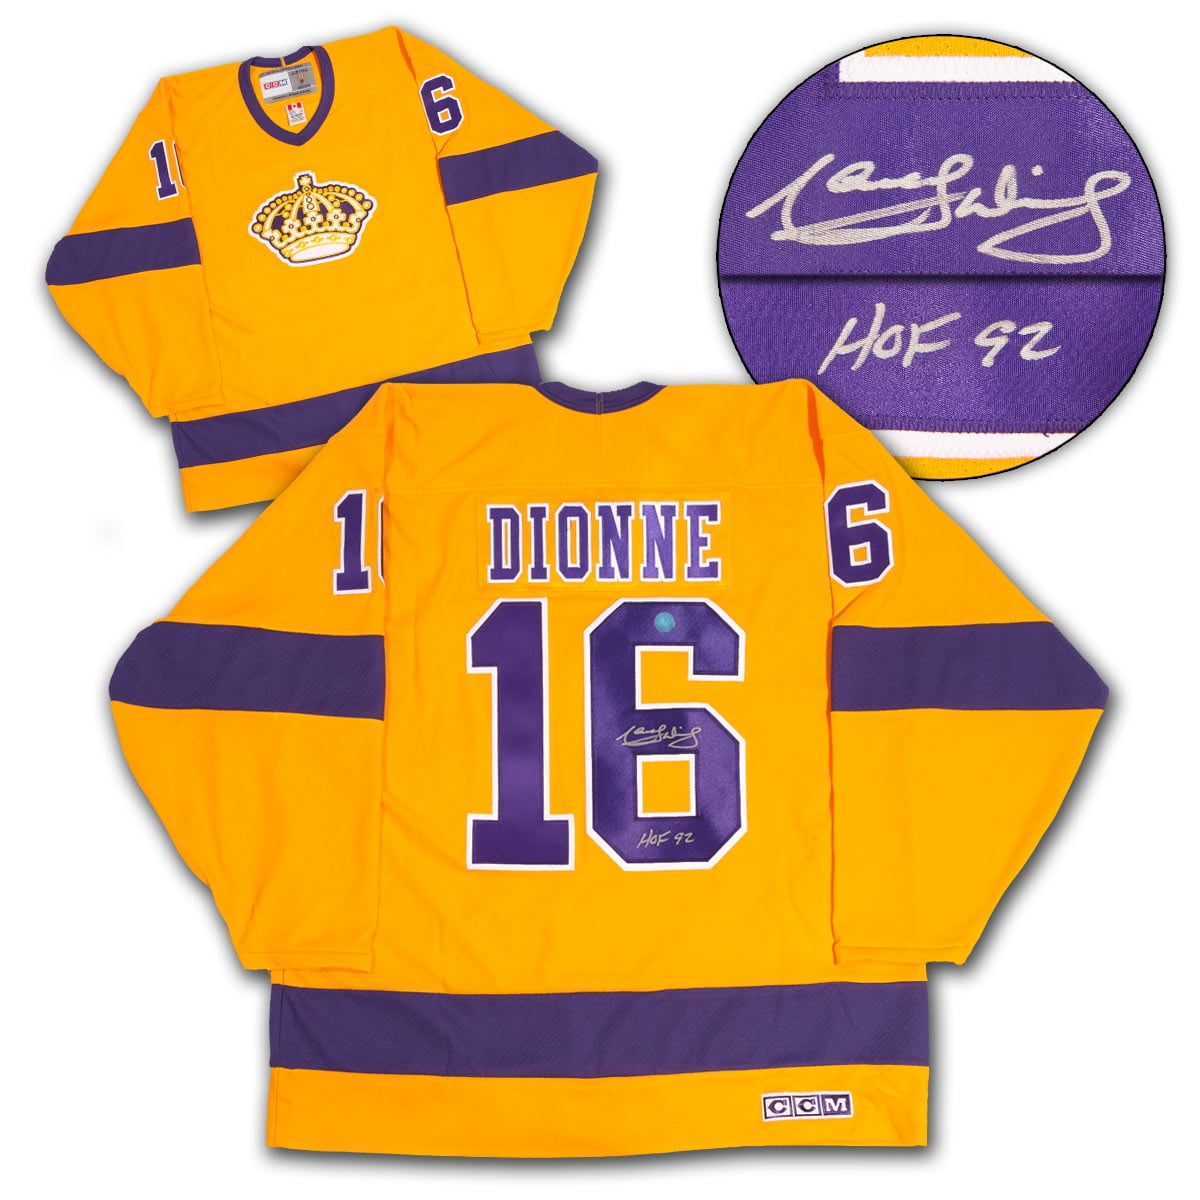 los angeles kings yellow jersey